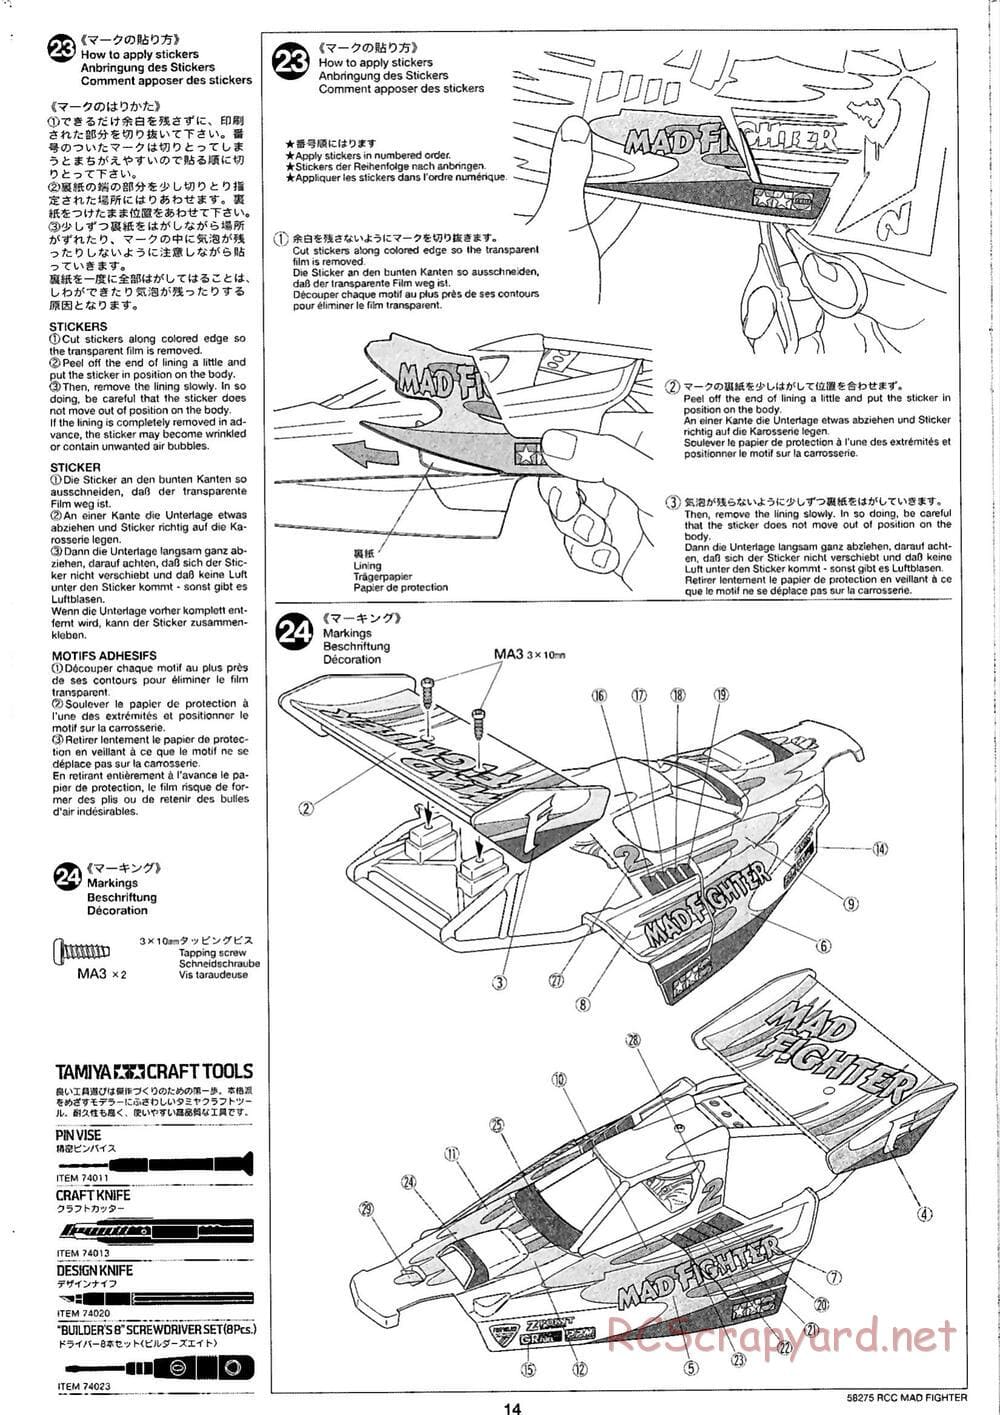 Tamiya - Mad Fighter Chassis - Manual - Page 15